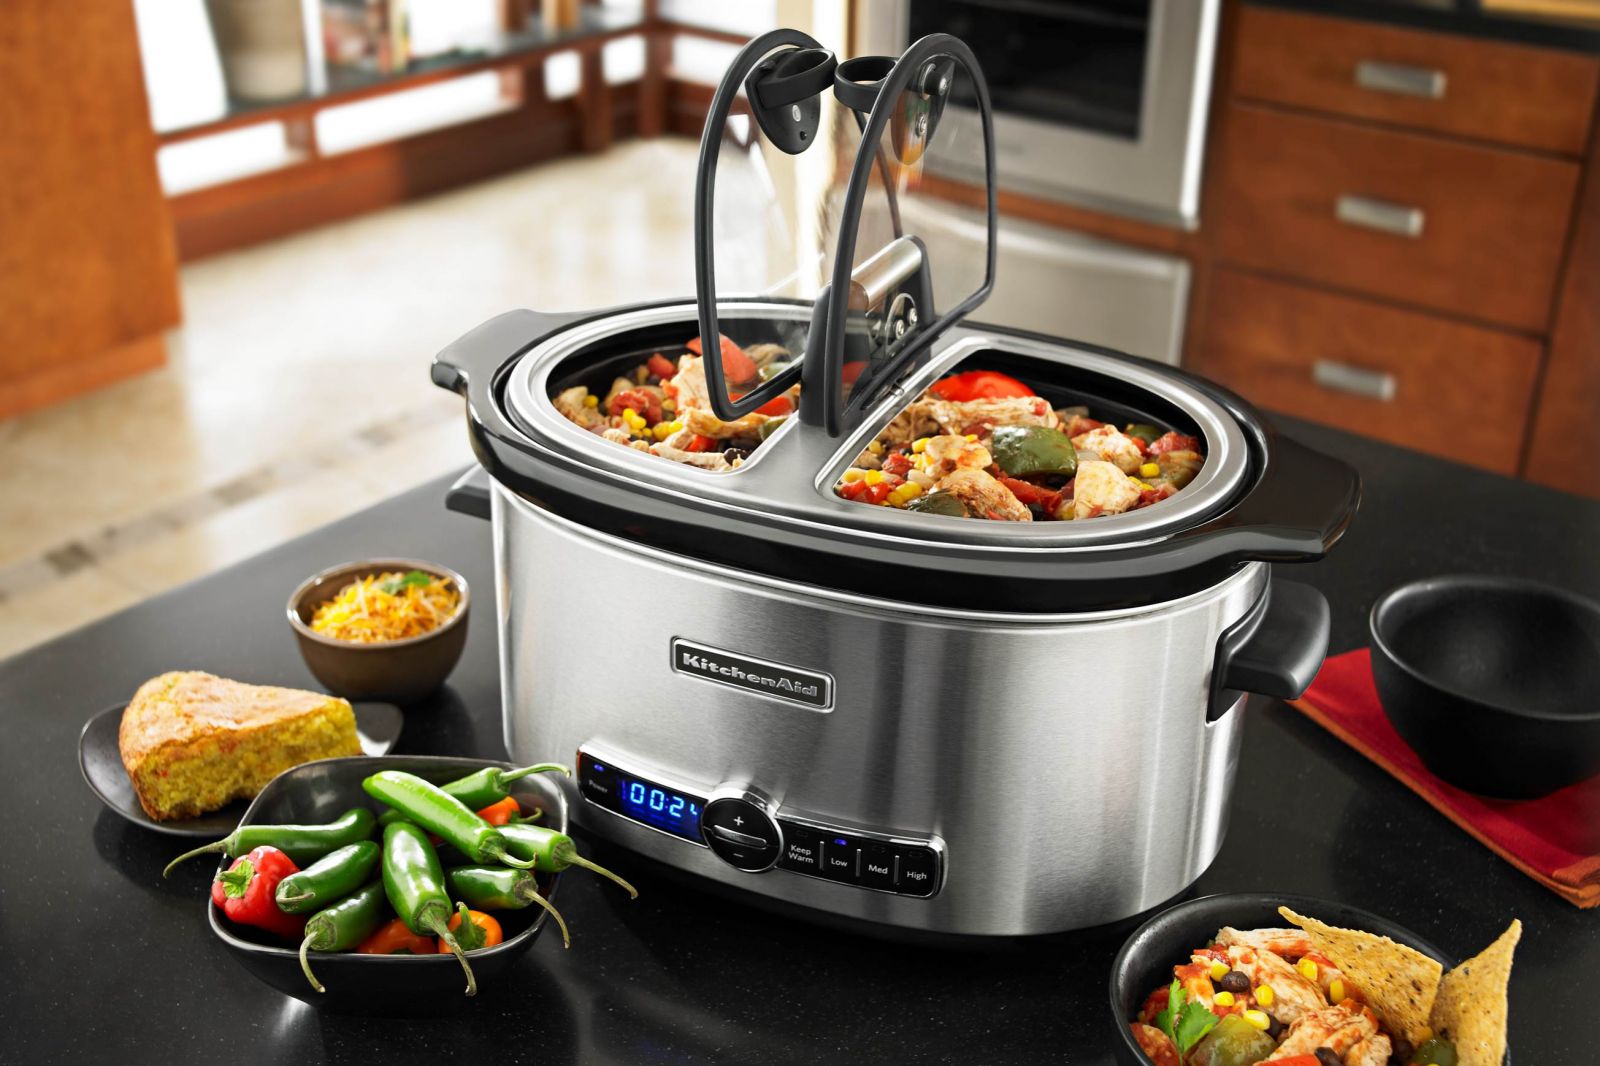 🍲 Make a Cozy Slow-Cooker Dinner and We’ll Give You a Fluffy Dog Breed to Adopt slow cooker